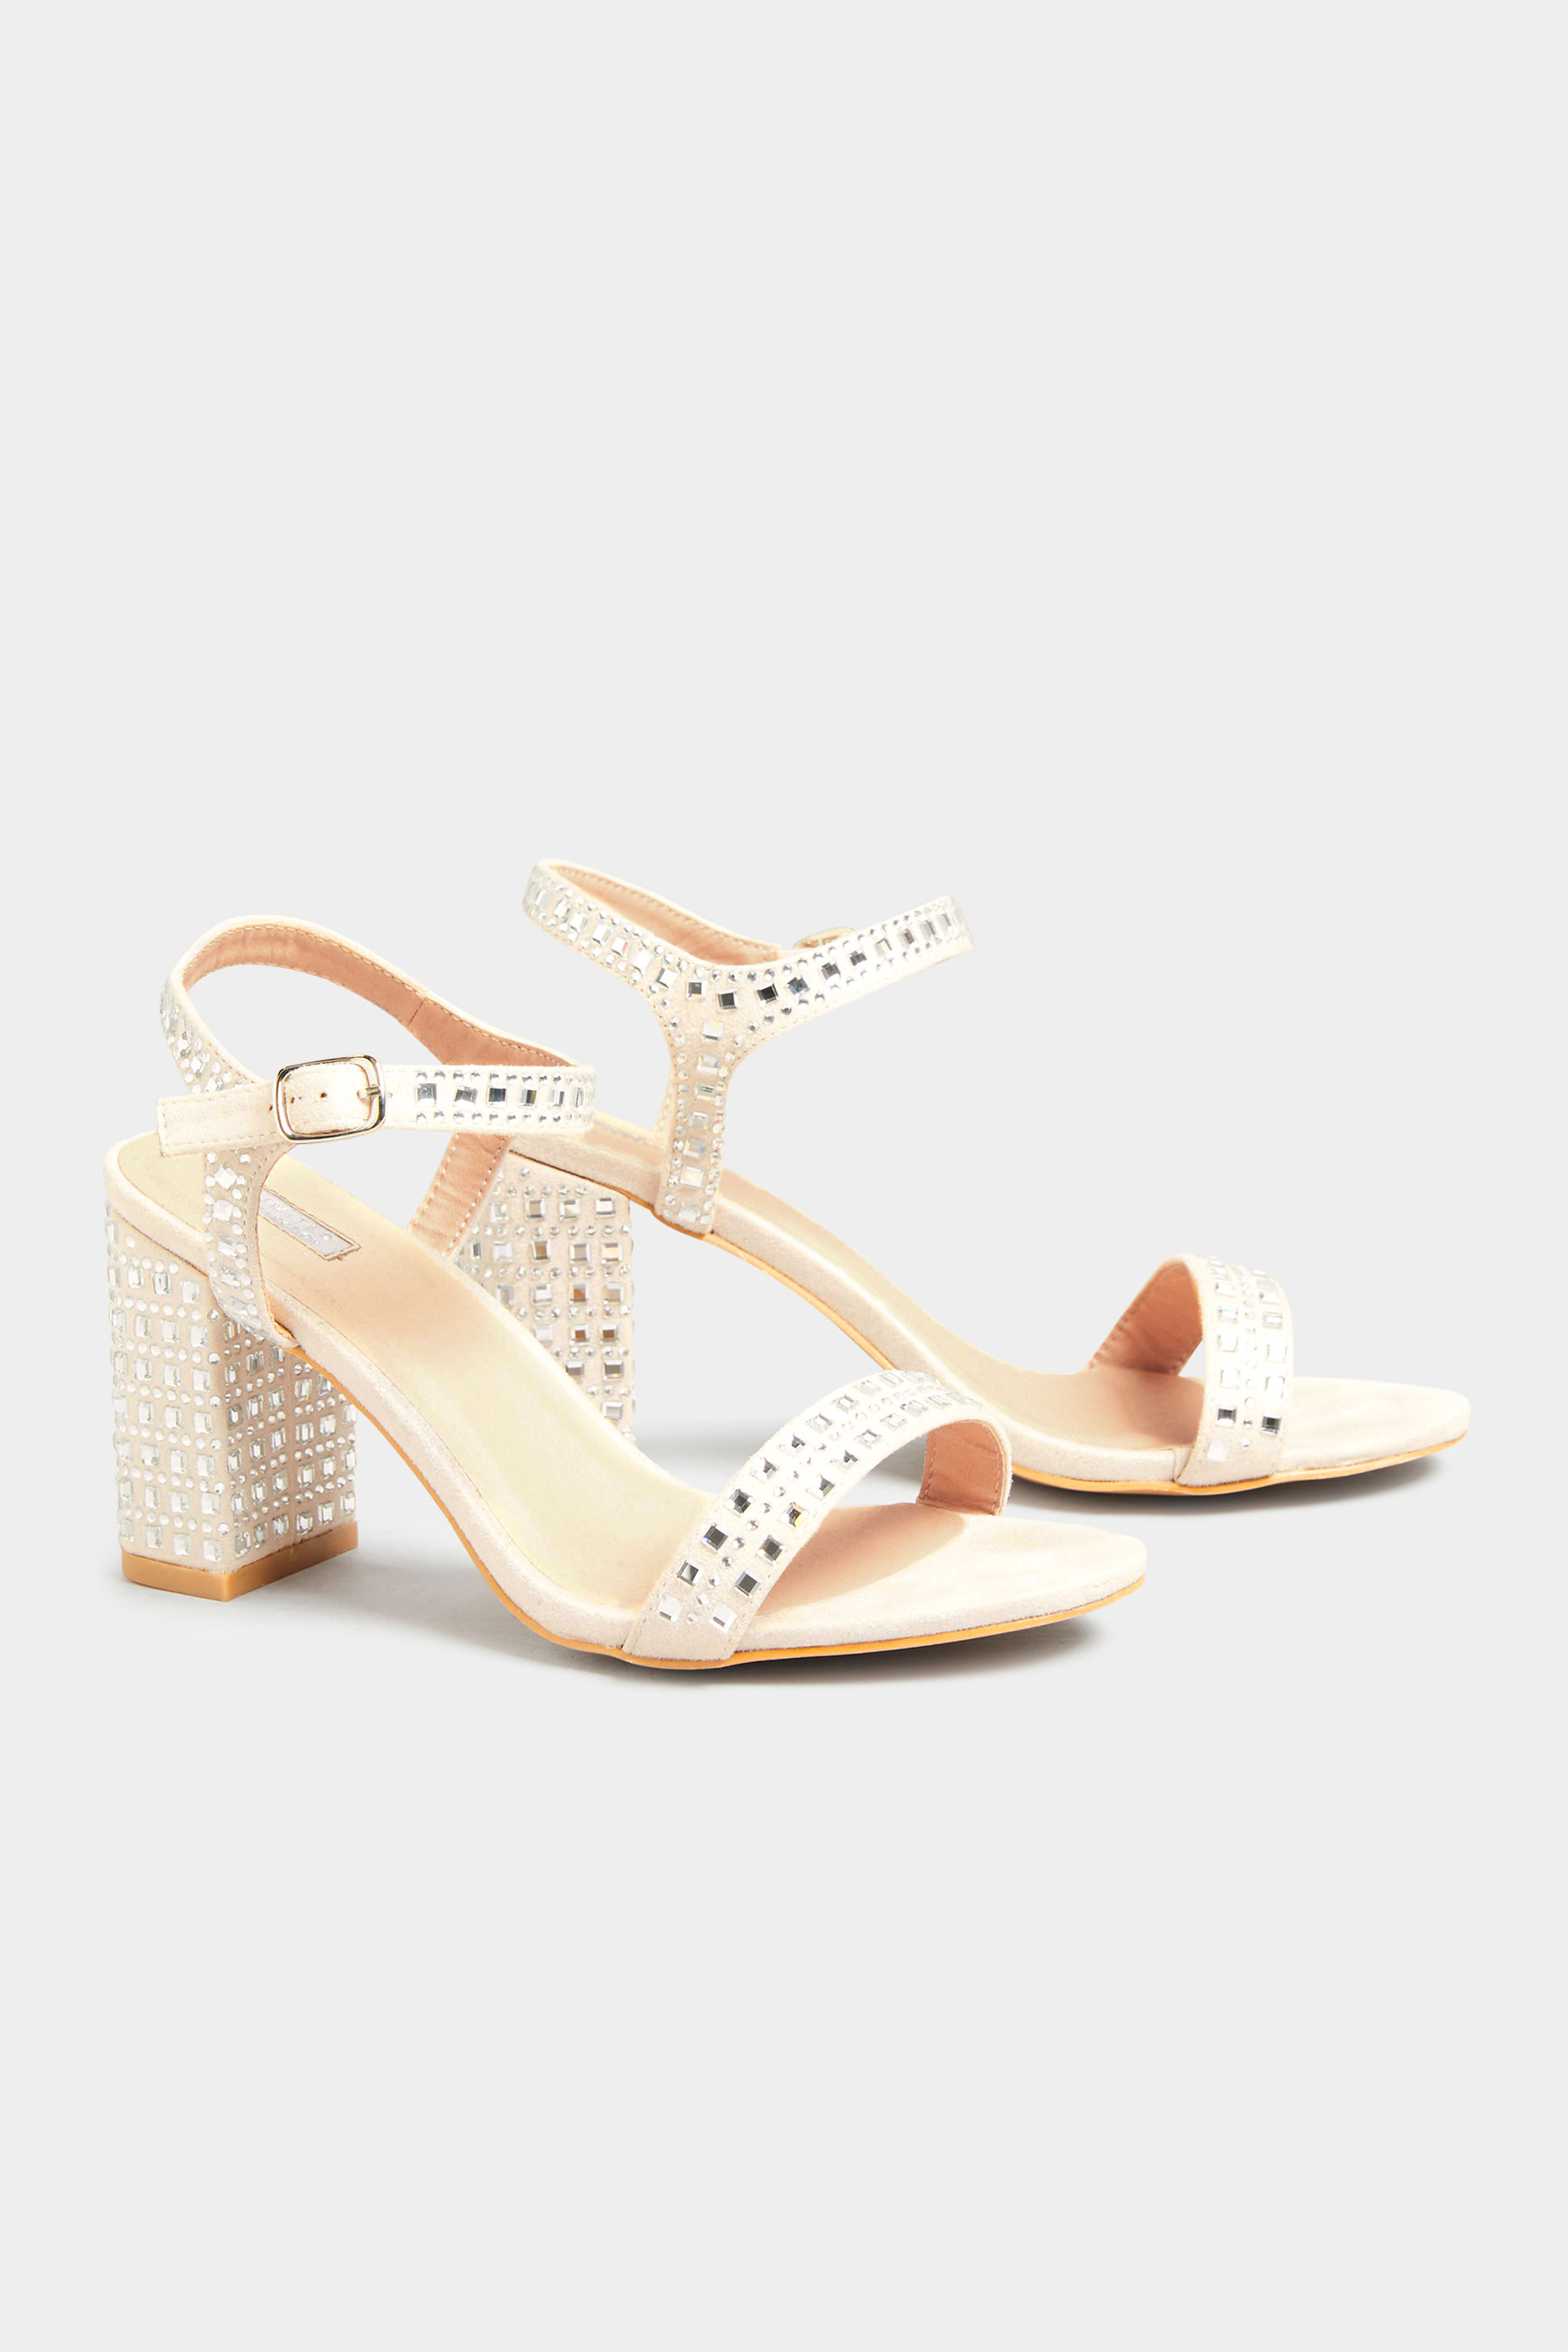 LIMITED COLLECTION Cream Diamante Strappy Heels In Extra Wide EEE Fit 1